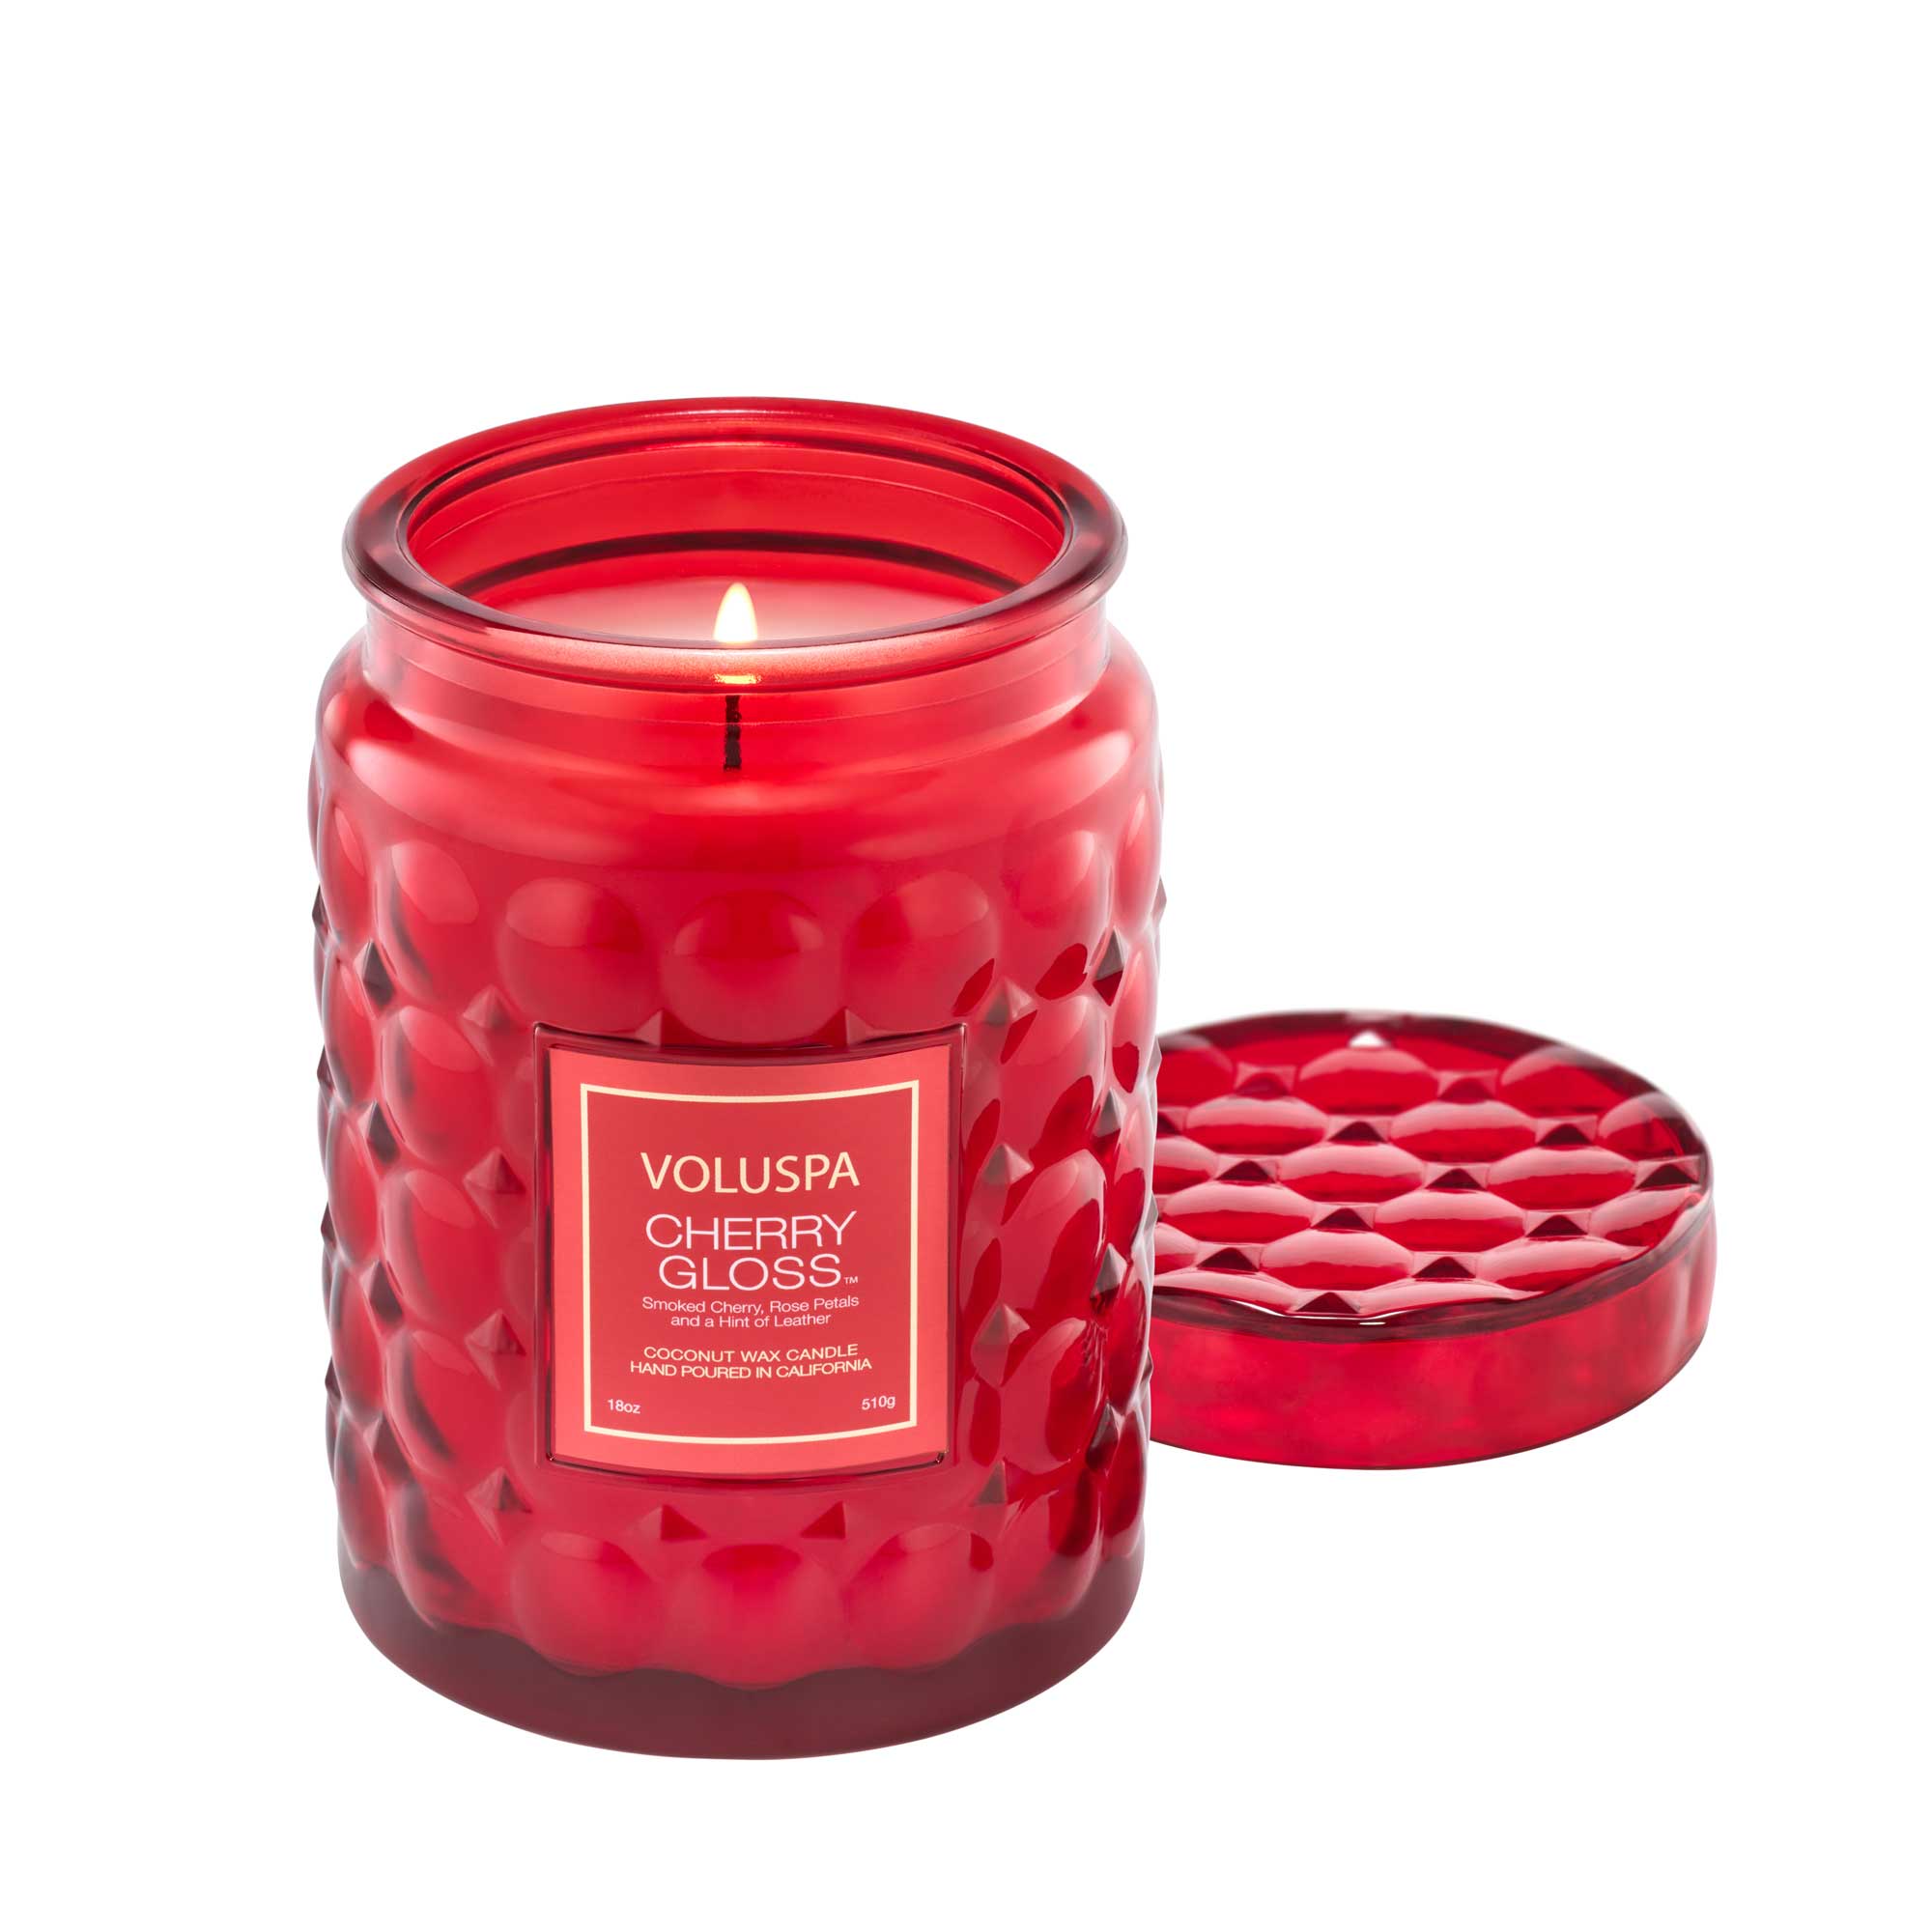 Voluspa Limited Editon Capsule Collection Large Jar 18oz Candle - Cherry Gloss / Cherry Gloss